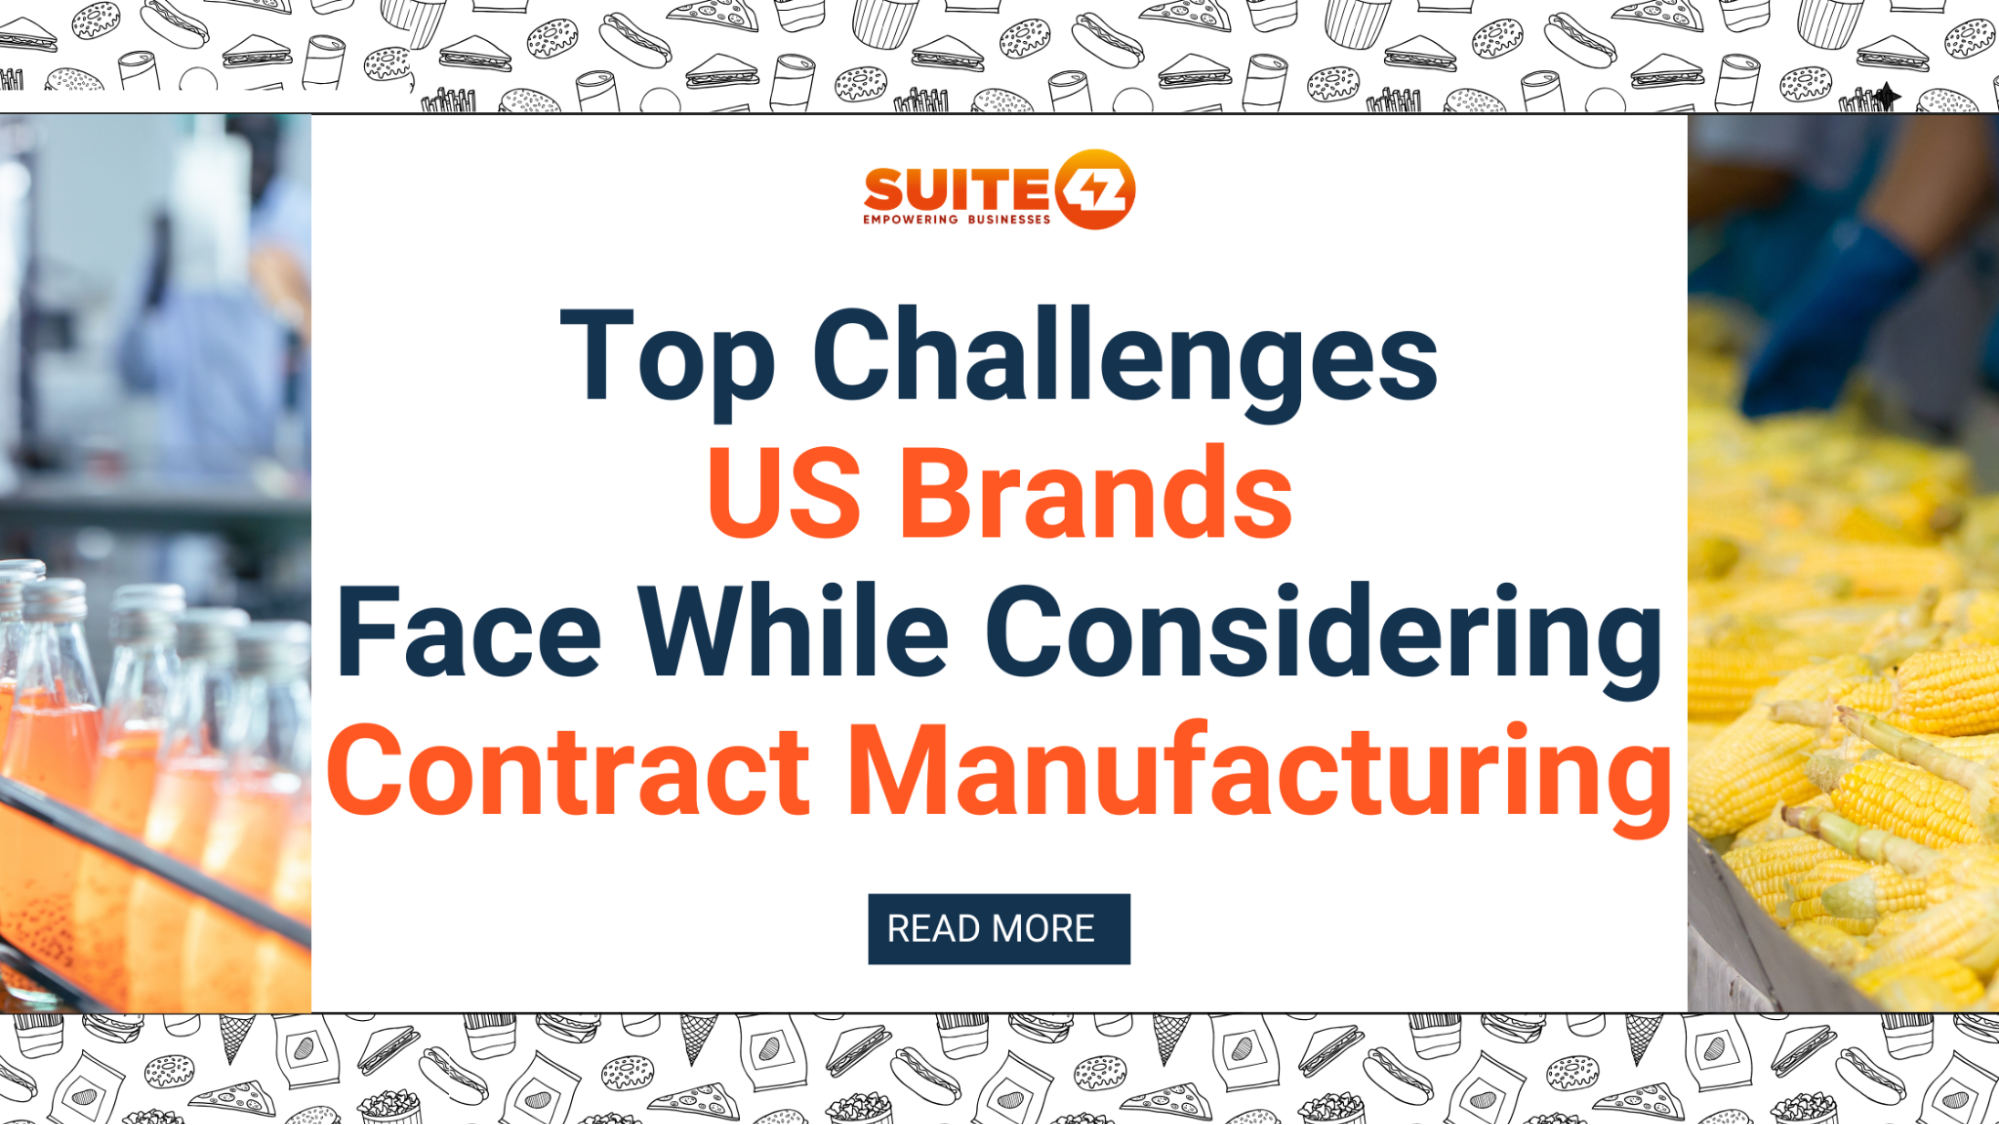 Top Challenges of US Food & Beverage Contract Manufacturing